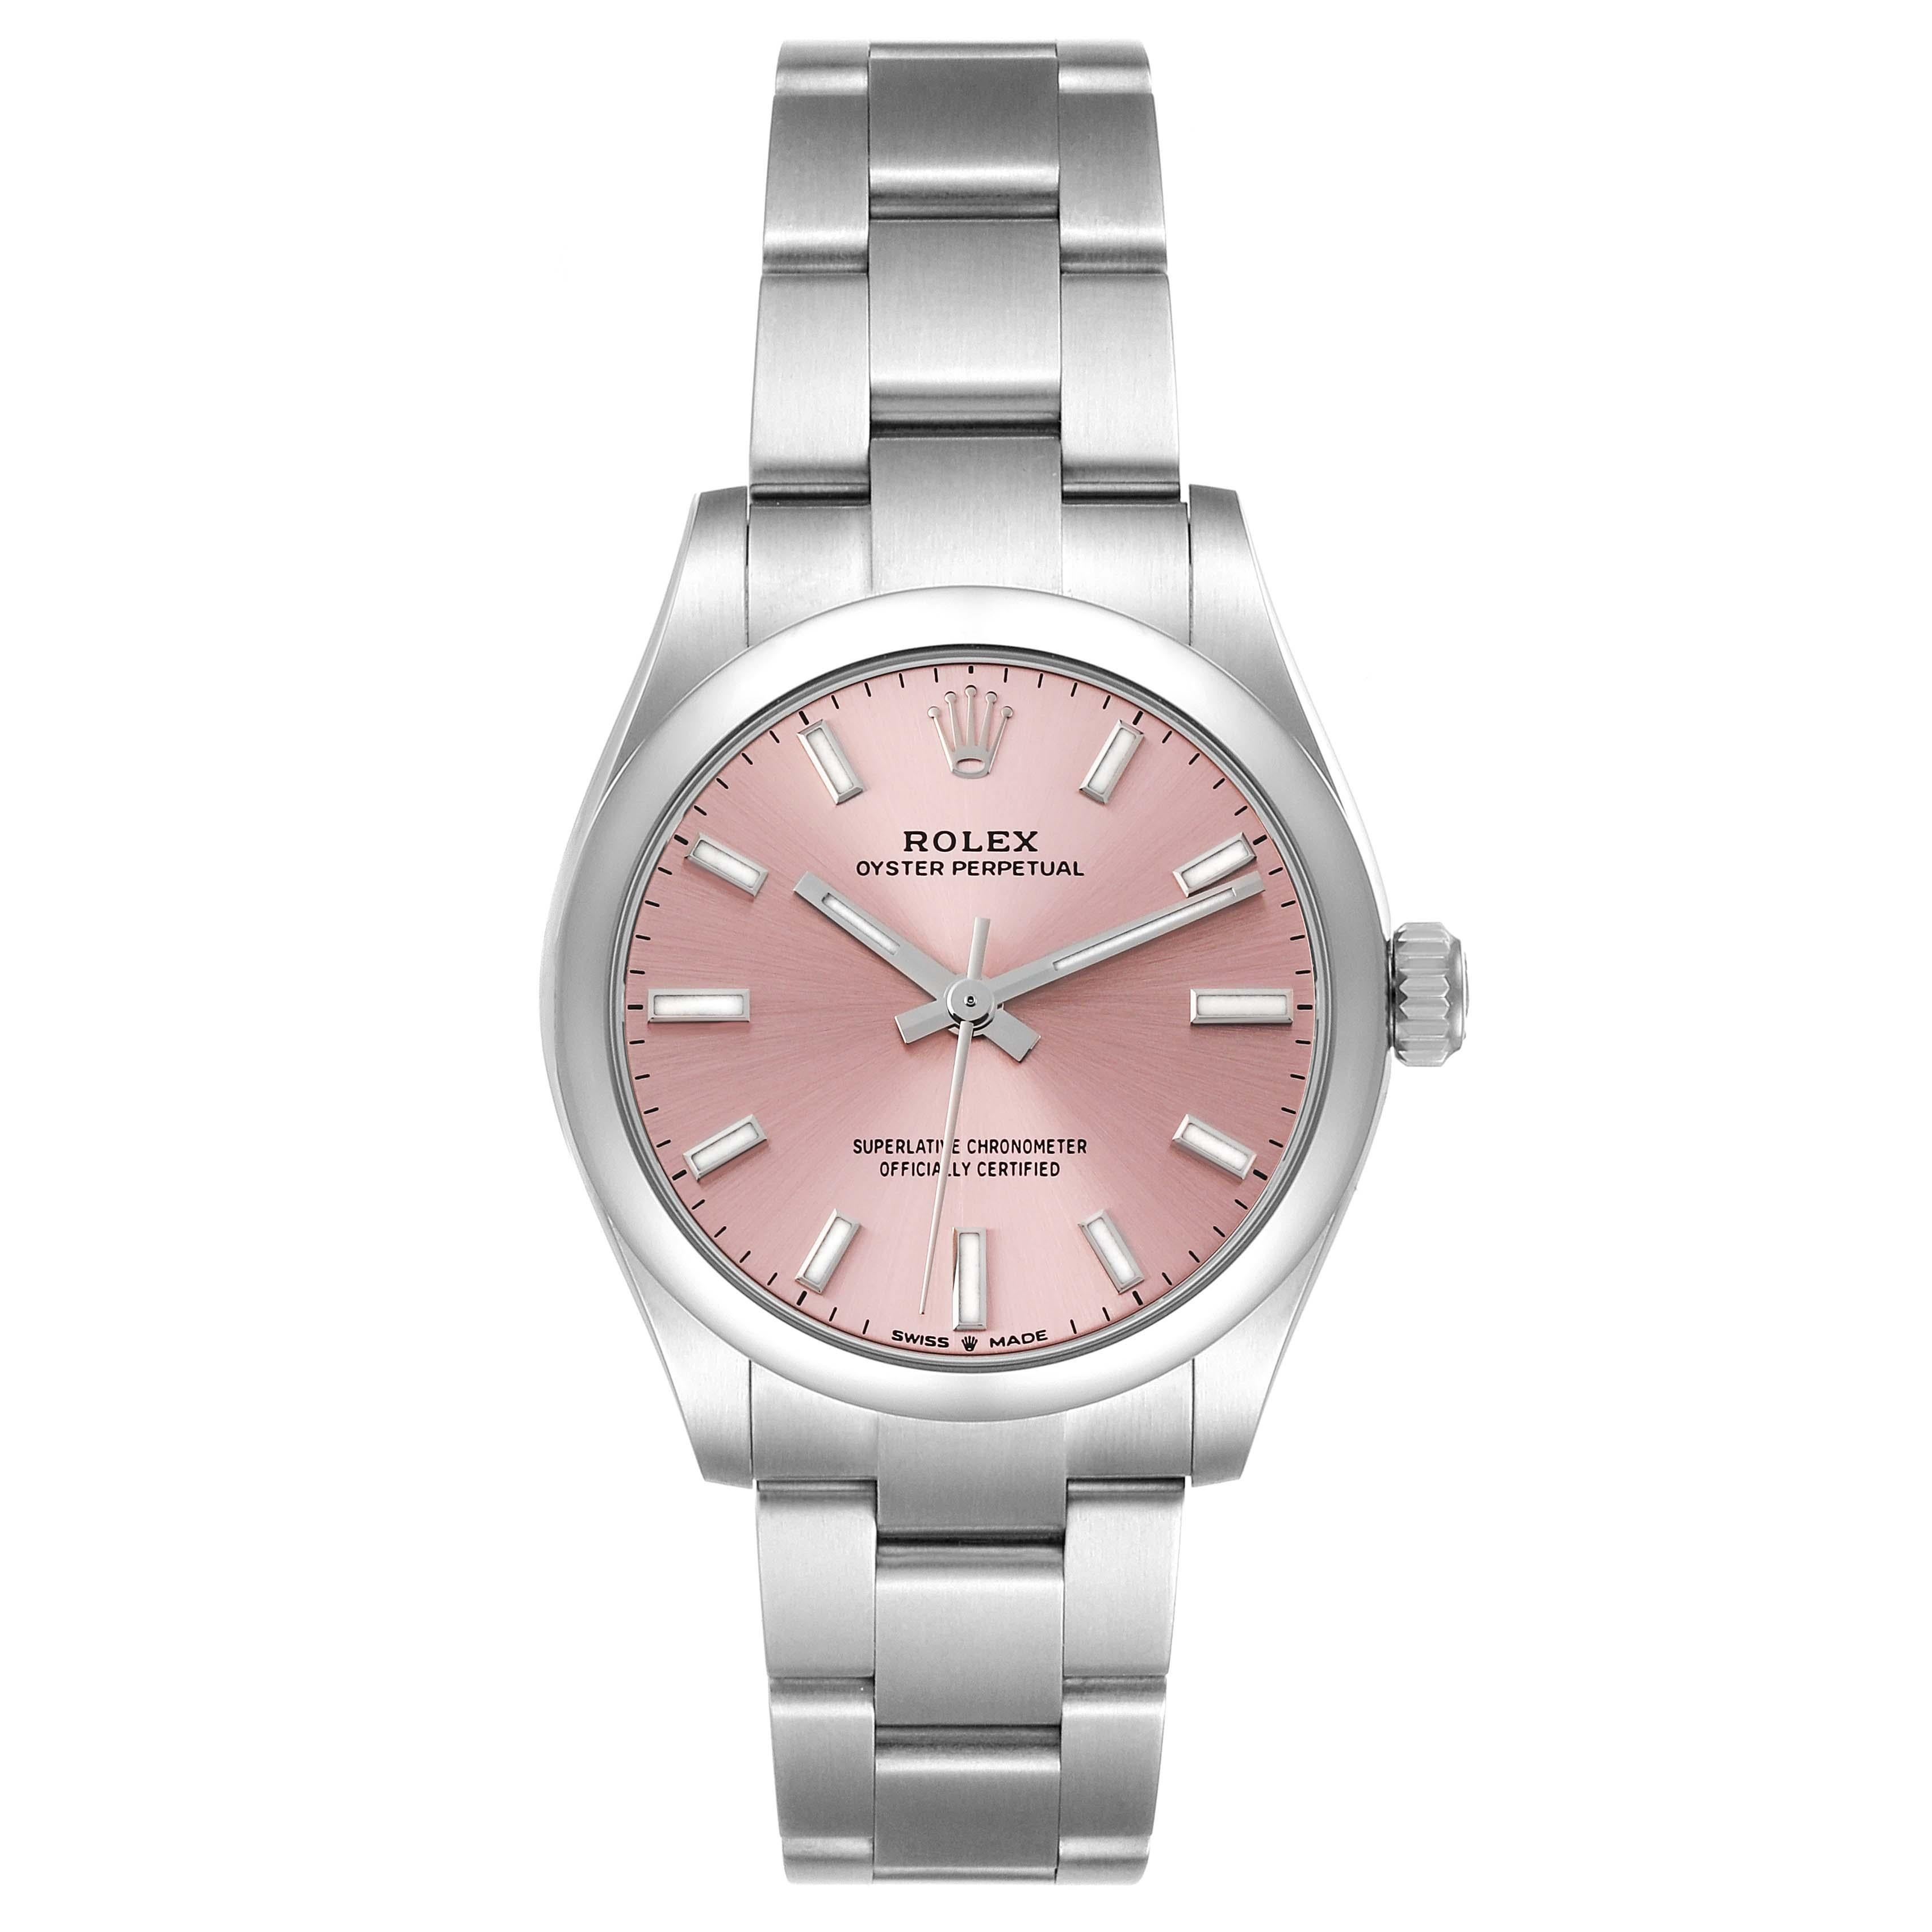 Rolex Midsize 31mm Pink Dial Automatic Steel Ladies Watch 277200 Unworn. Automatic self-winding movement. Stainless steel oyster case 31.0 mm in diameter. Rolex logo on a crown. Stainless steel smooth bezel. Scratch resistant sapphire crystal. Pink